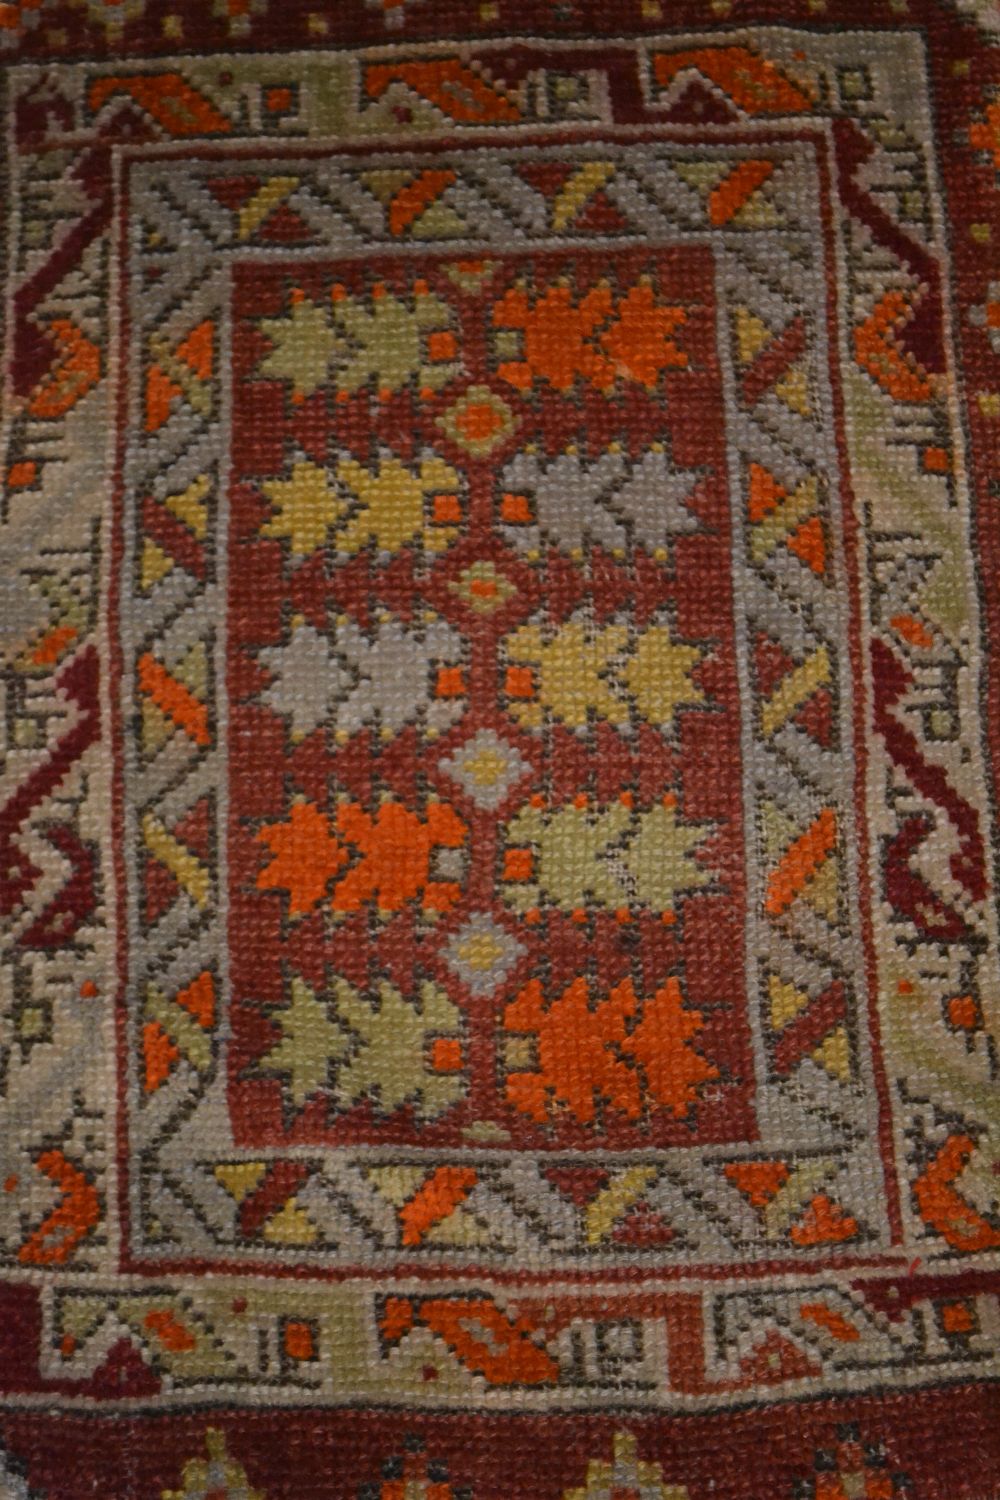 Kirshehir yastik, central Anatolia, late 19th century, 3ft. 2in. x 1ft. 11in. 0.97m. x 0.59m. - Image 4 of 5